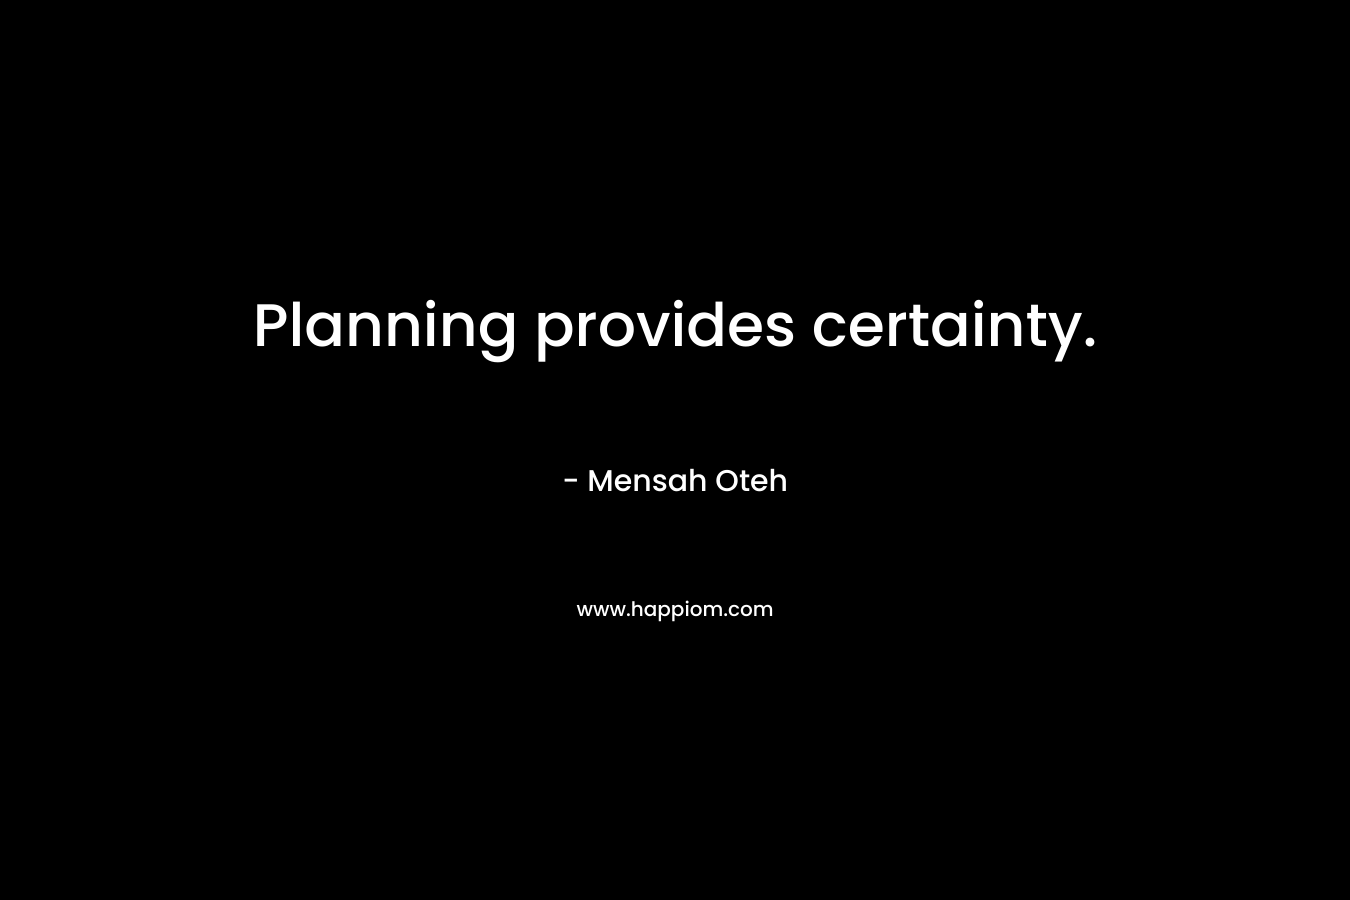 Planning provides certainty.